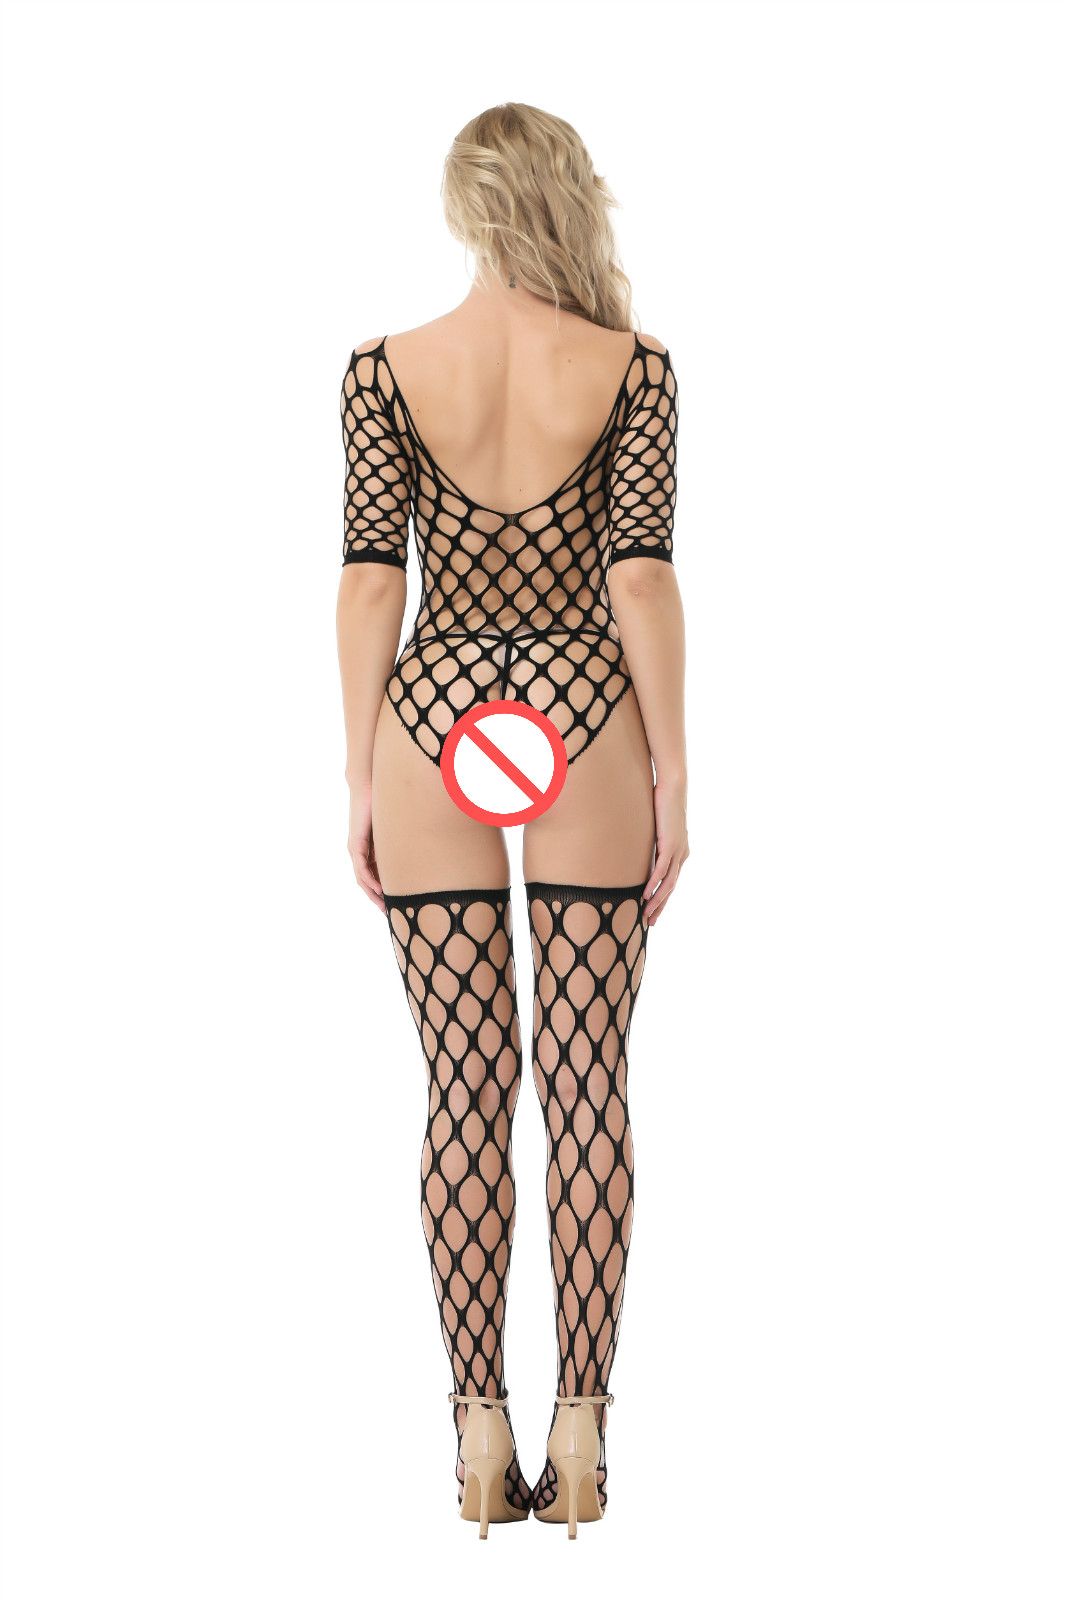 Buy Dropship Products Of Plus Women Sex Costumes Ladies Hot Lingerie Transparent Erotic Underwear Babydolls Sleepwear Body Stocking Sexy Sleepwear In Bulk From Sexy Costumes | DHgate.Com